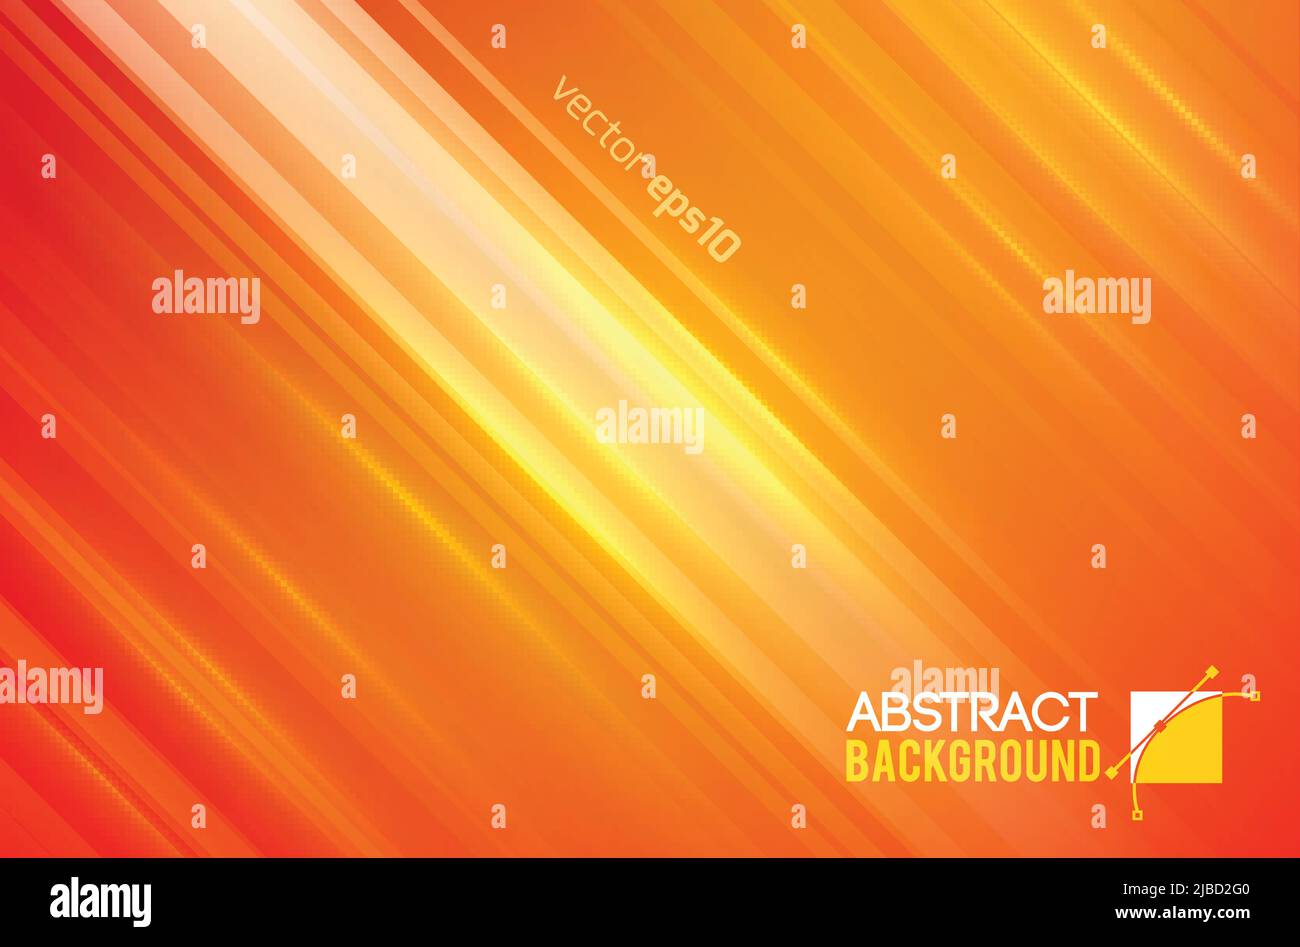 Abstract bright template with straight diagonal lines and light sparkling effects on orange background vector illustration Stock Vector